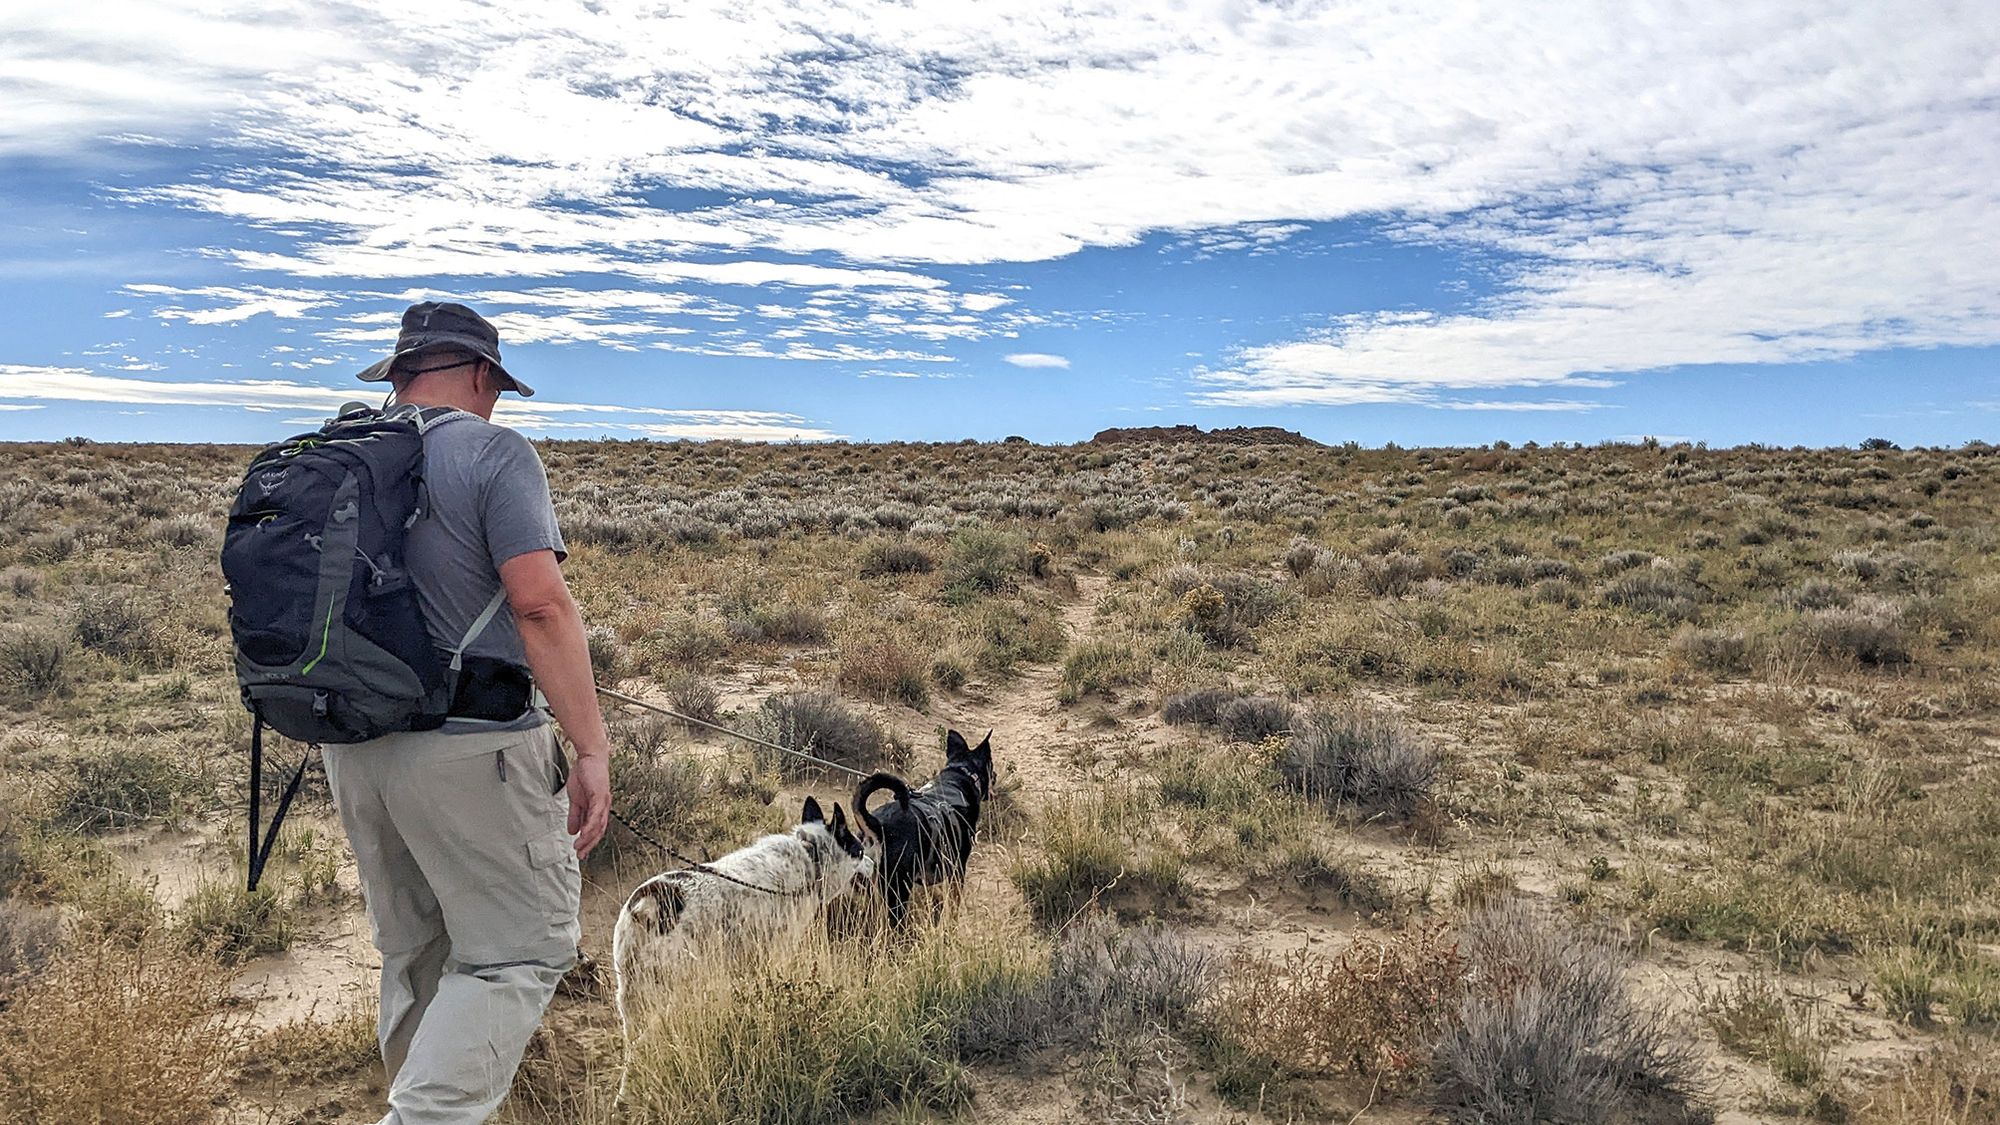 Visiting Chaco Canyon with Dogs